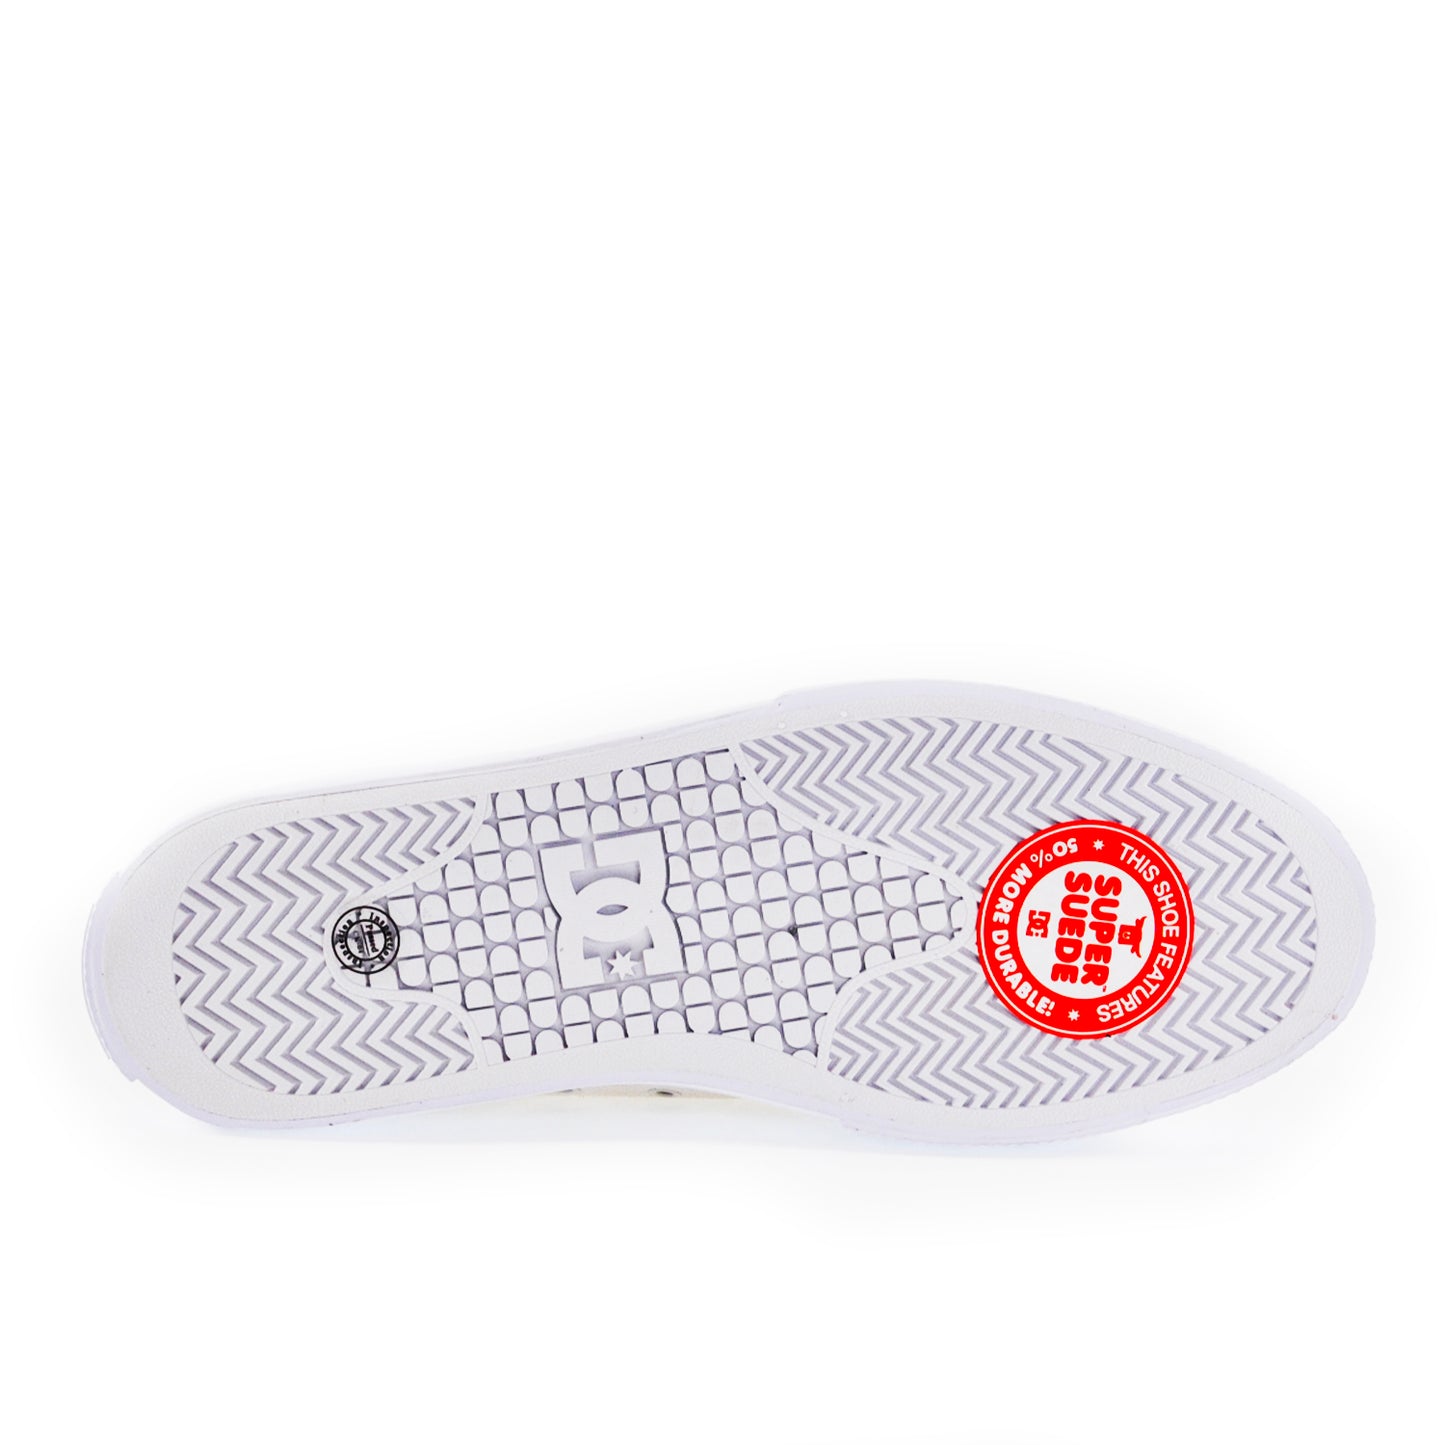 DC Shoes Manual High Skate Shoes - White - Prime Delux Store